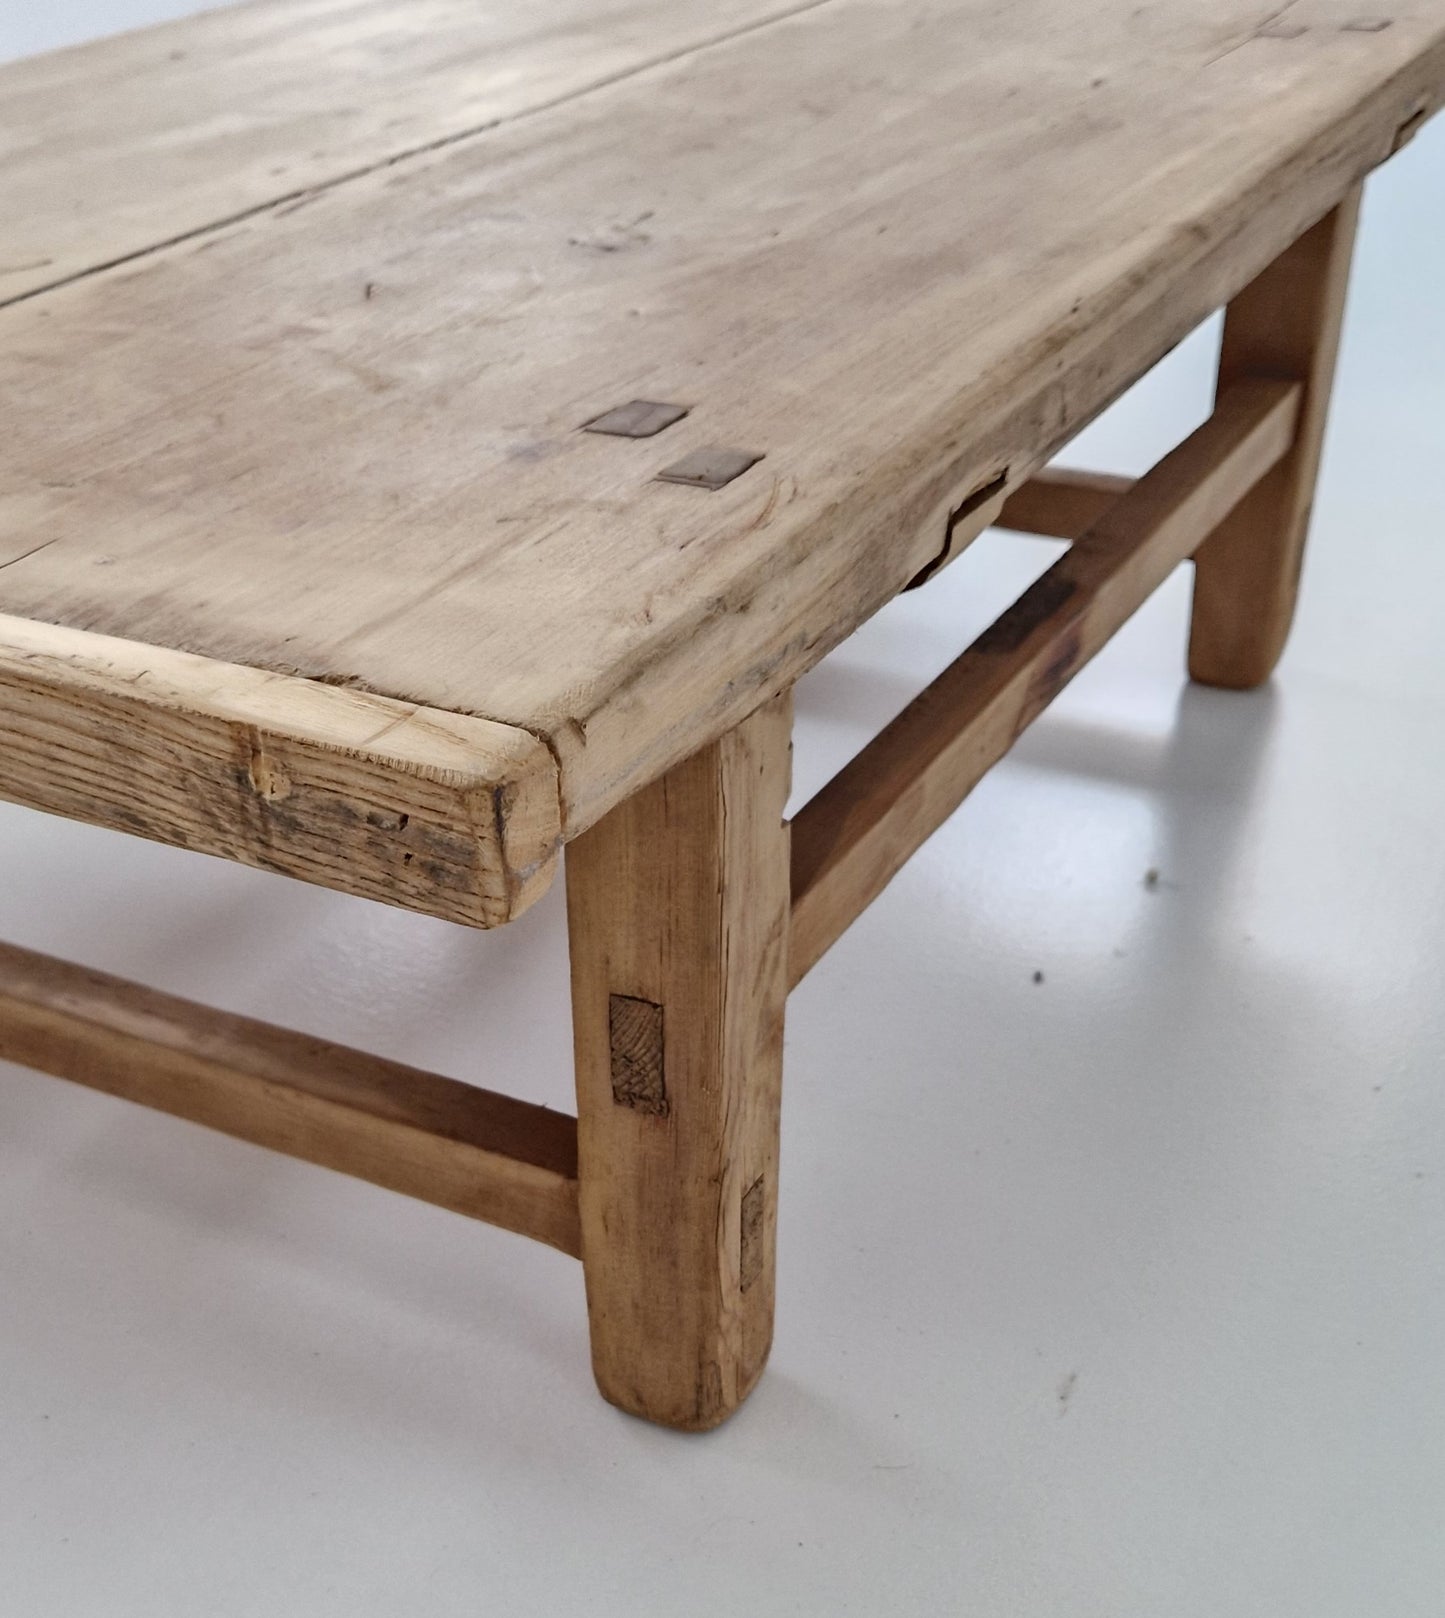 Chinese old wooden table #2 (91x52x28,5)